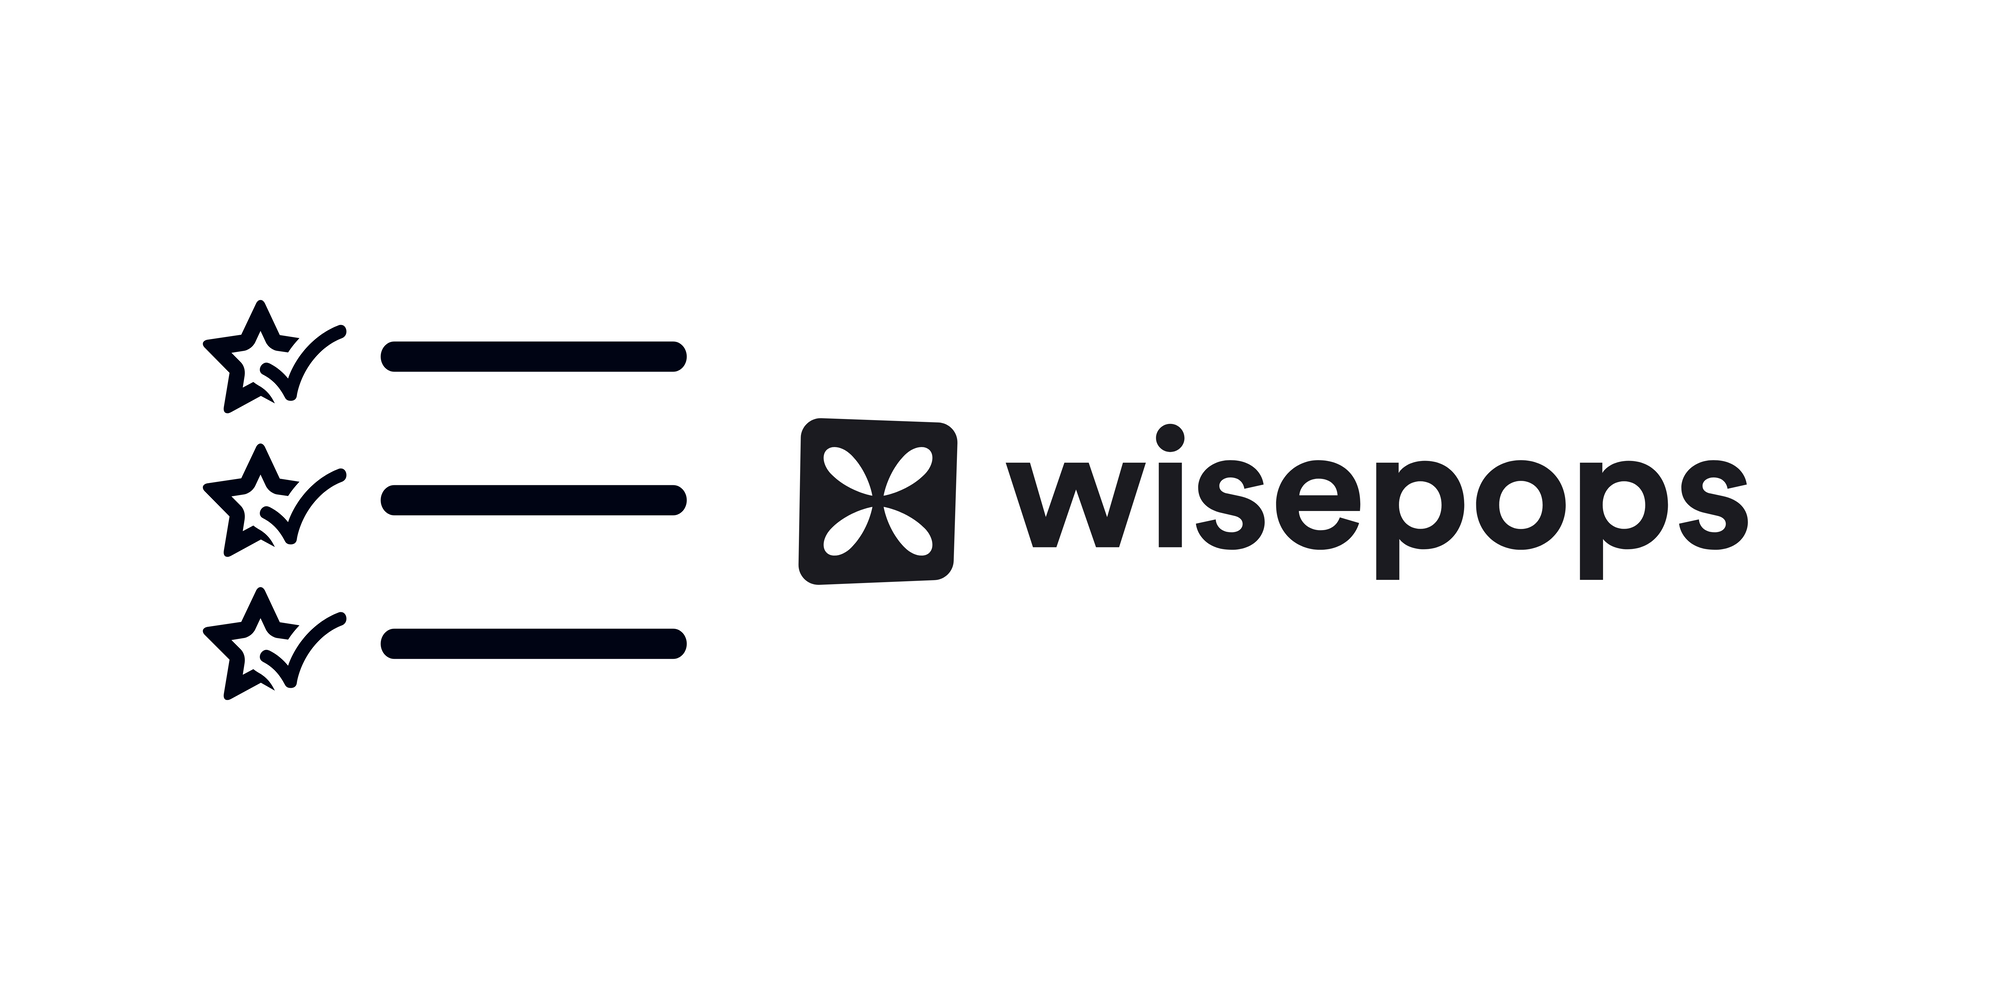 Wisepops icon and symbols to mention its features on white background